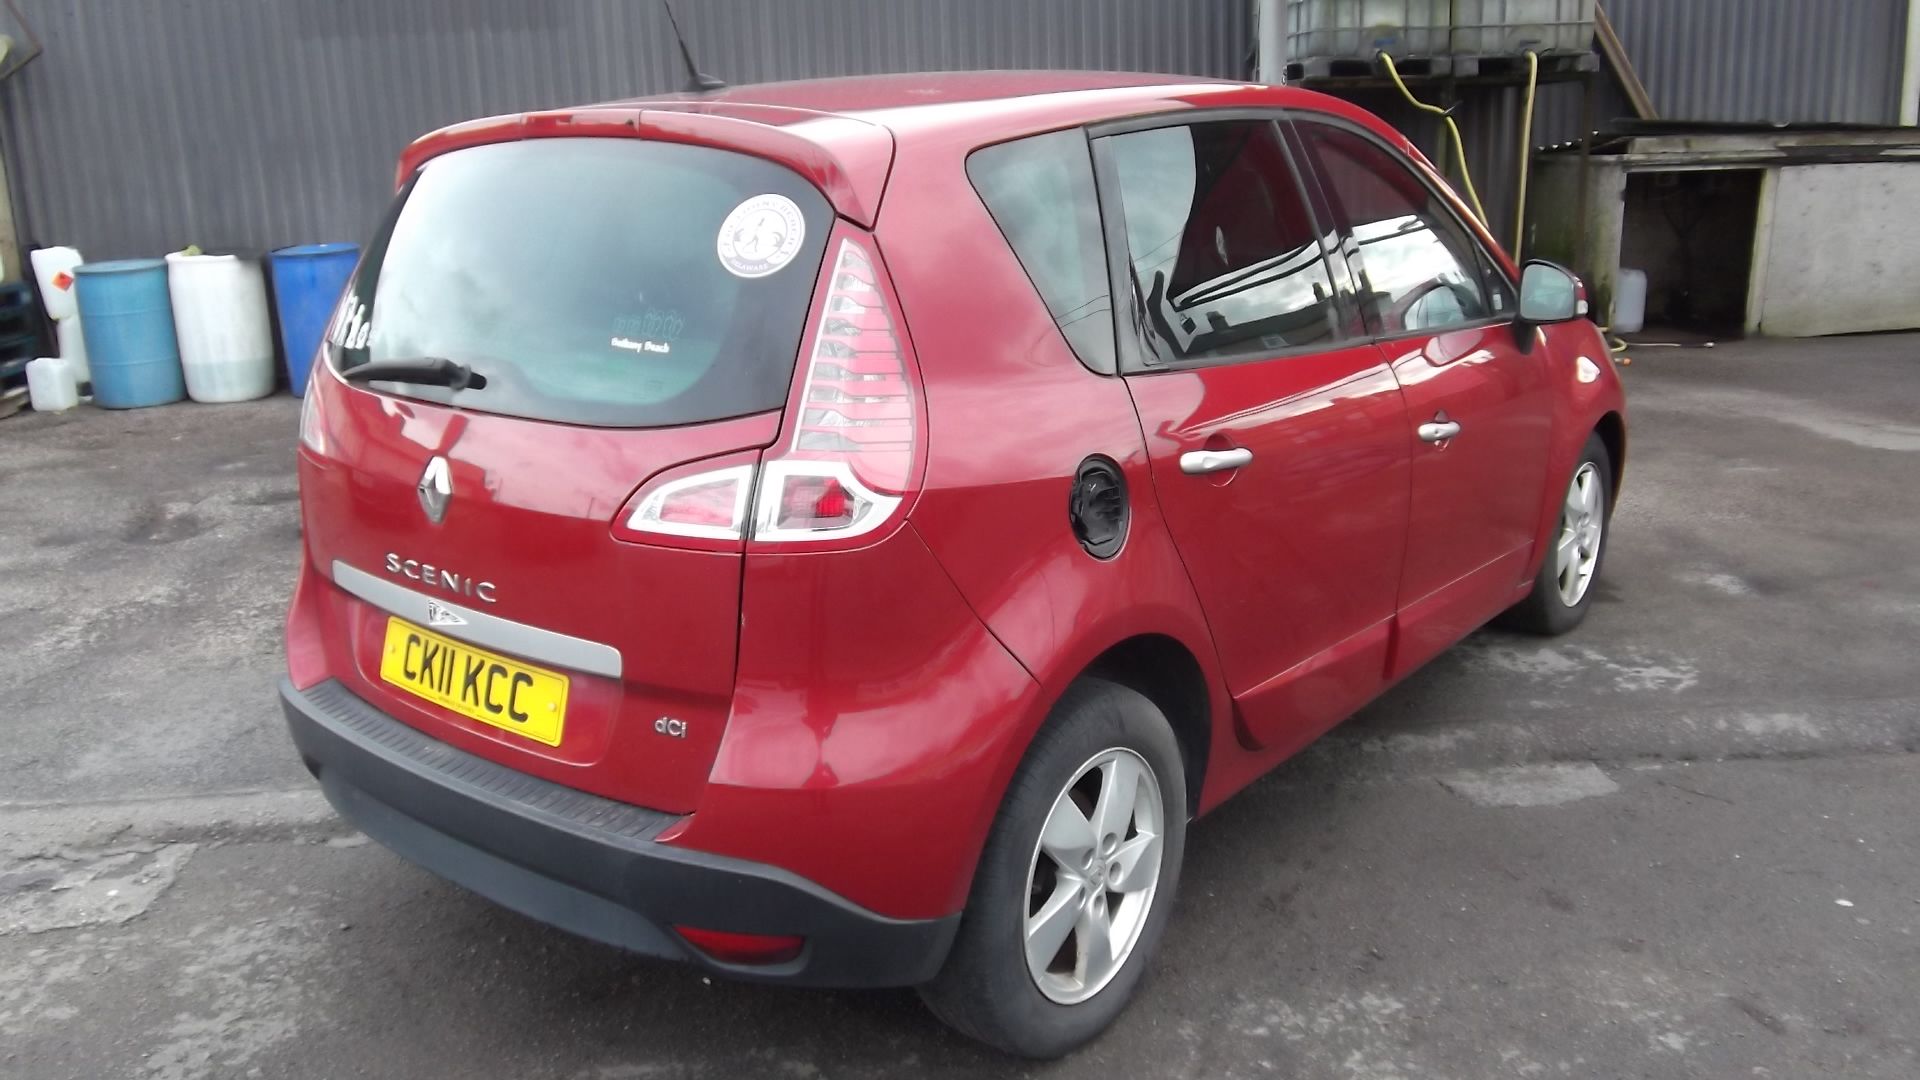 2011 Renault Scenic 1.5 DCI Dynamique Tom Tom 5 Door MPV - Image 11 of 17